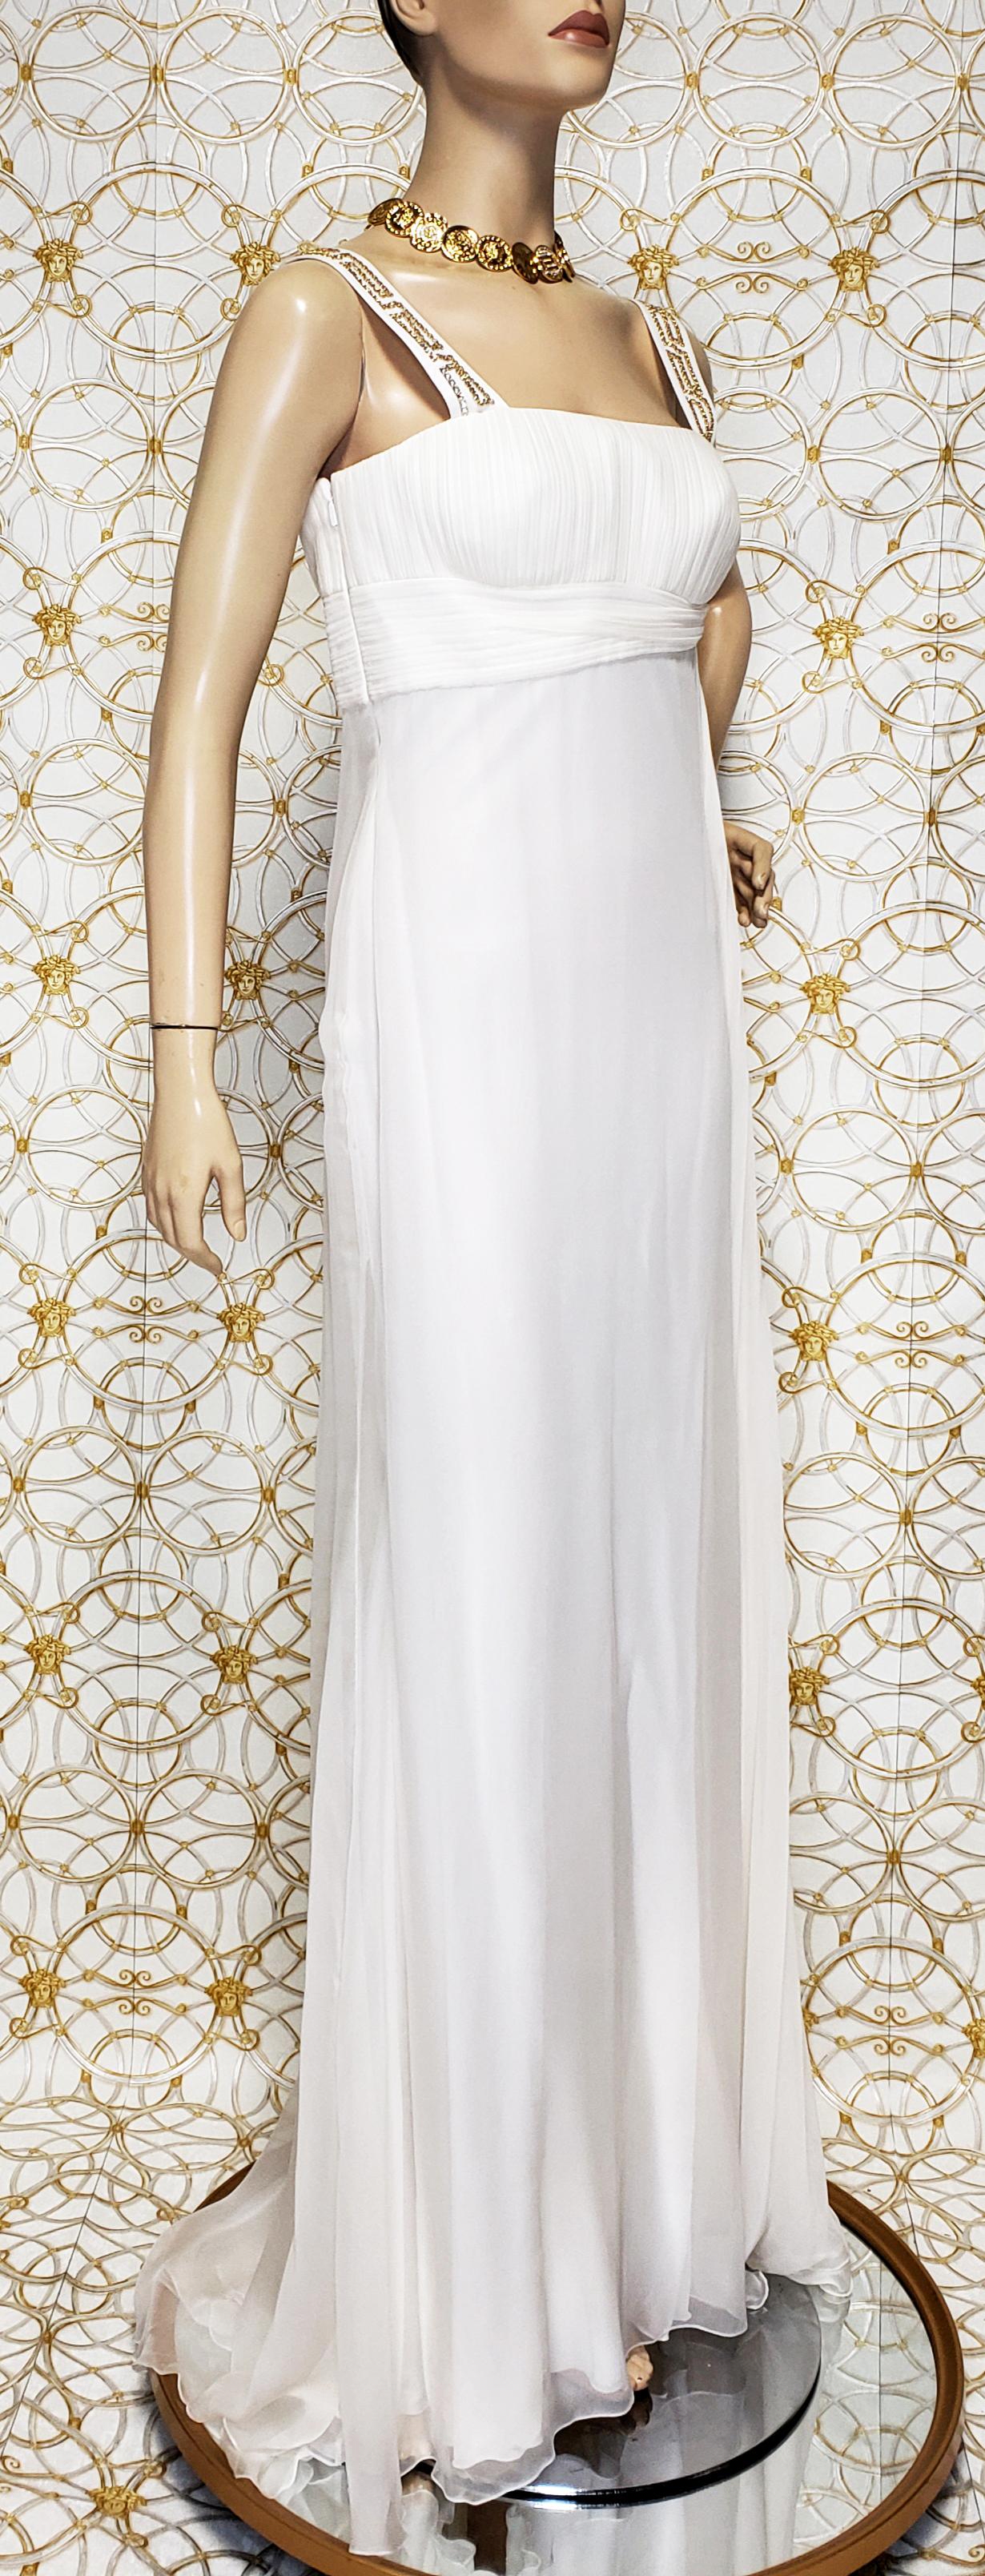 New Versace Crystal Embellished White Silk Gown 44 - 8 For Sale 8